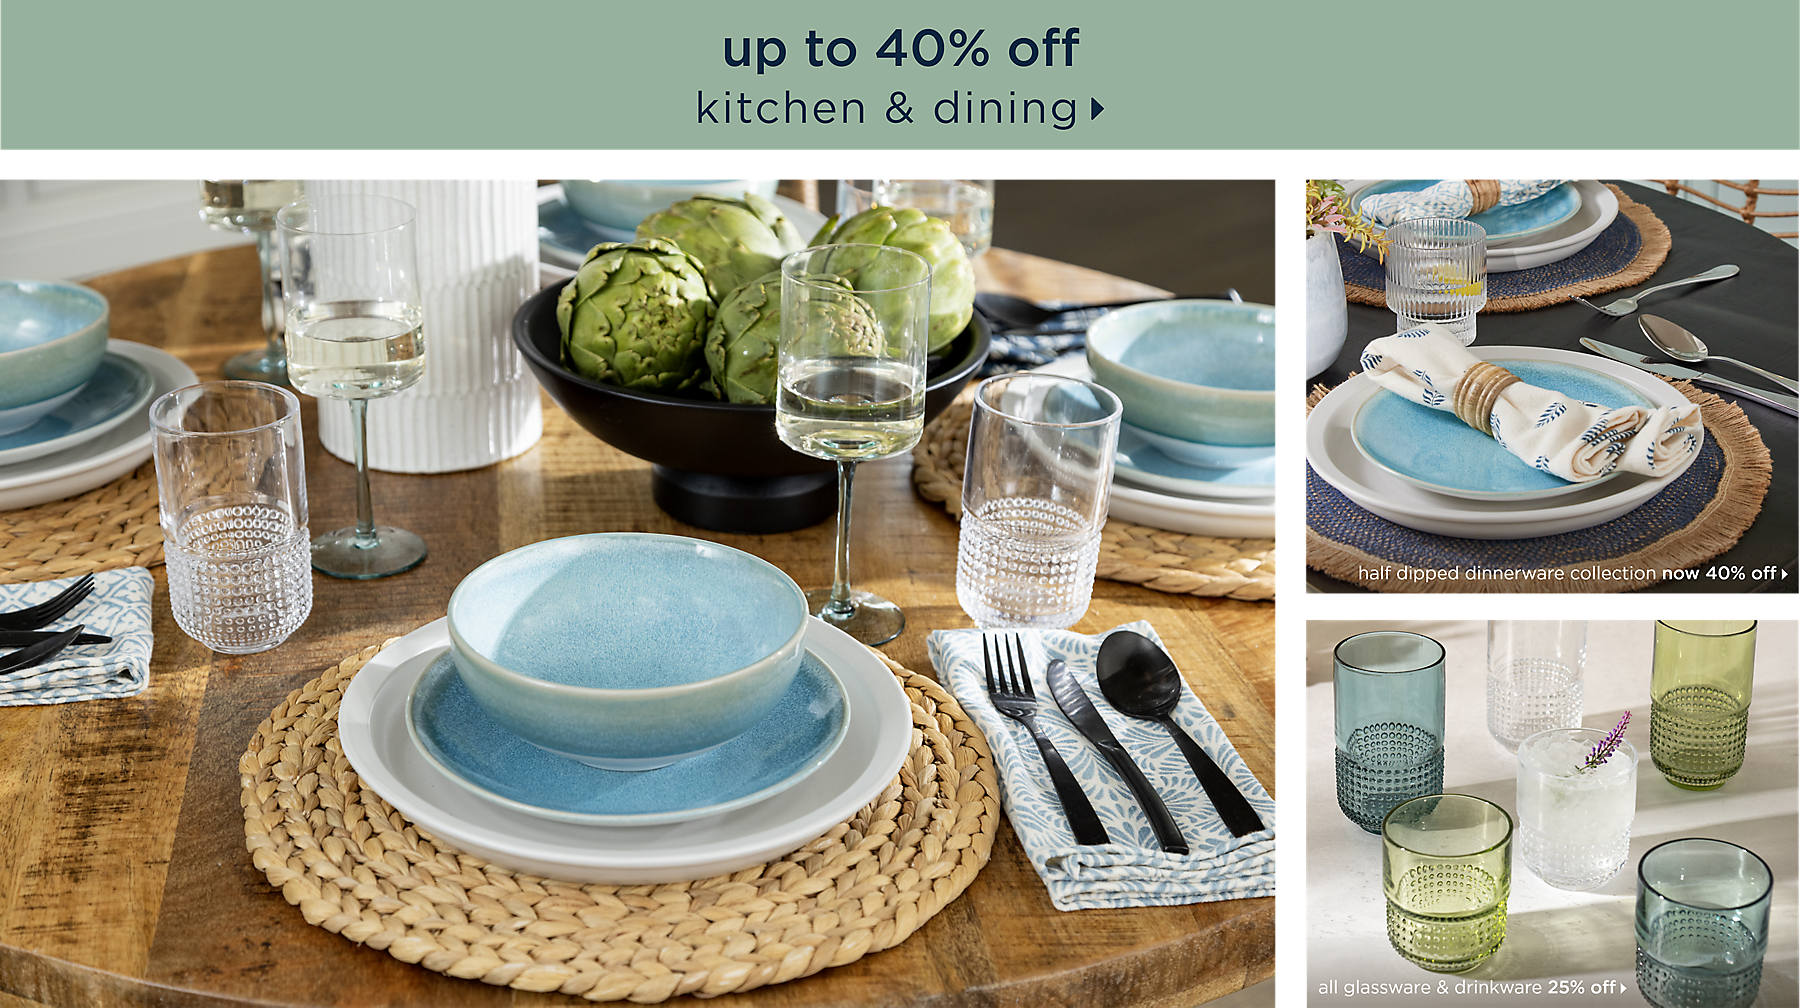 kitchen & dining up to 40% off half dipped dinnerware collection now 40% off all glassware & drinkware 25% off shop now